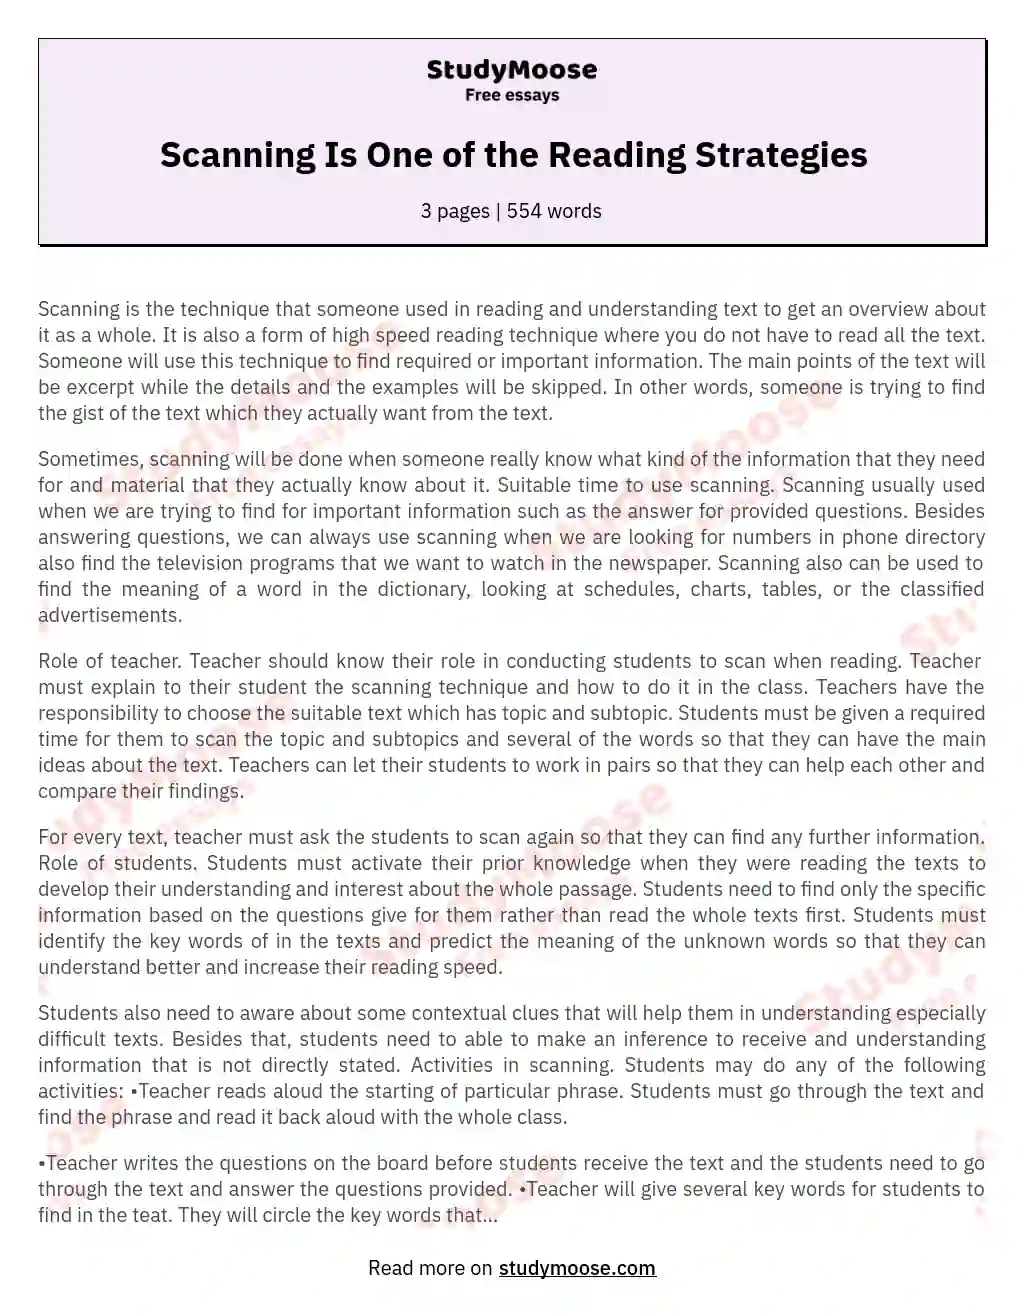 Scanning Is One of the Reading Strategies essay